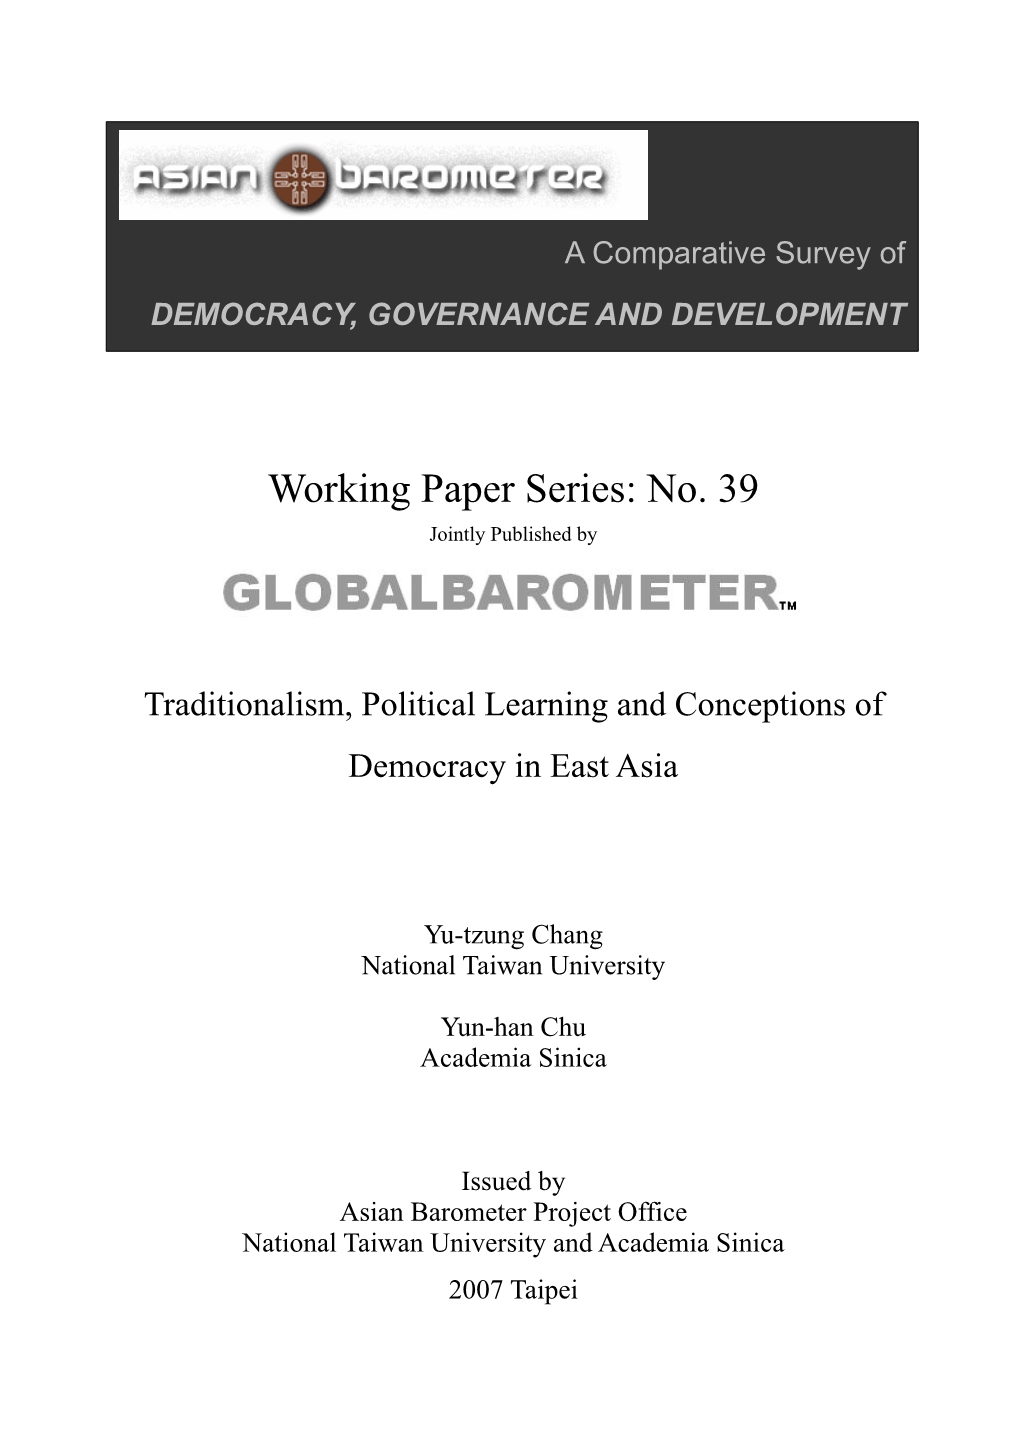 Working Paper Series: No. 39 Jointly Published By